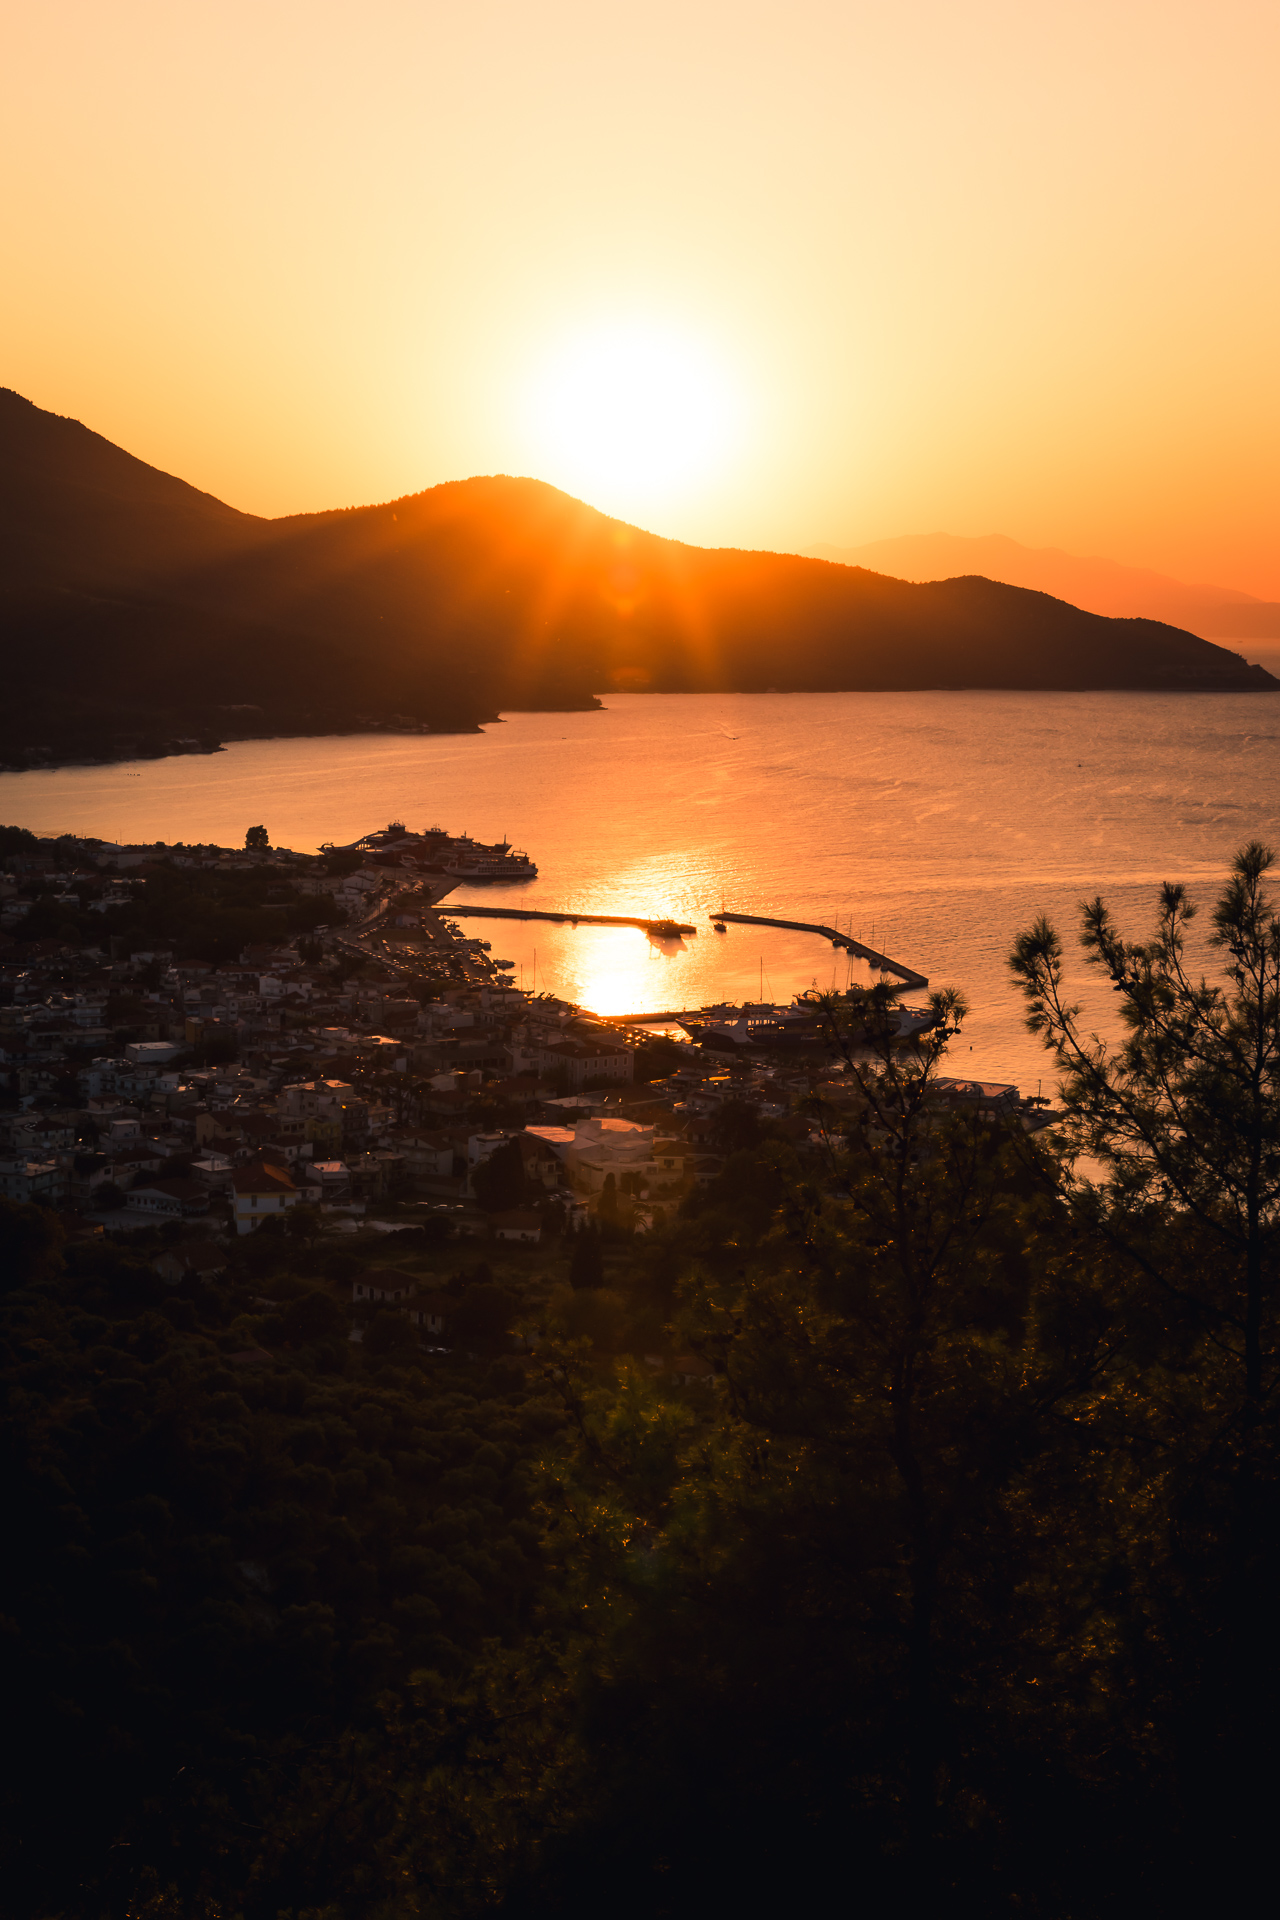 Photo of a sunset over a small town on Thassos, Greece.